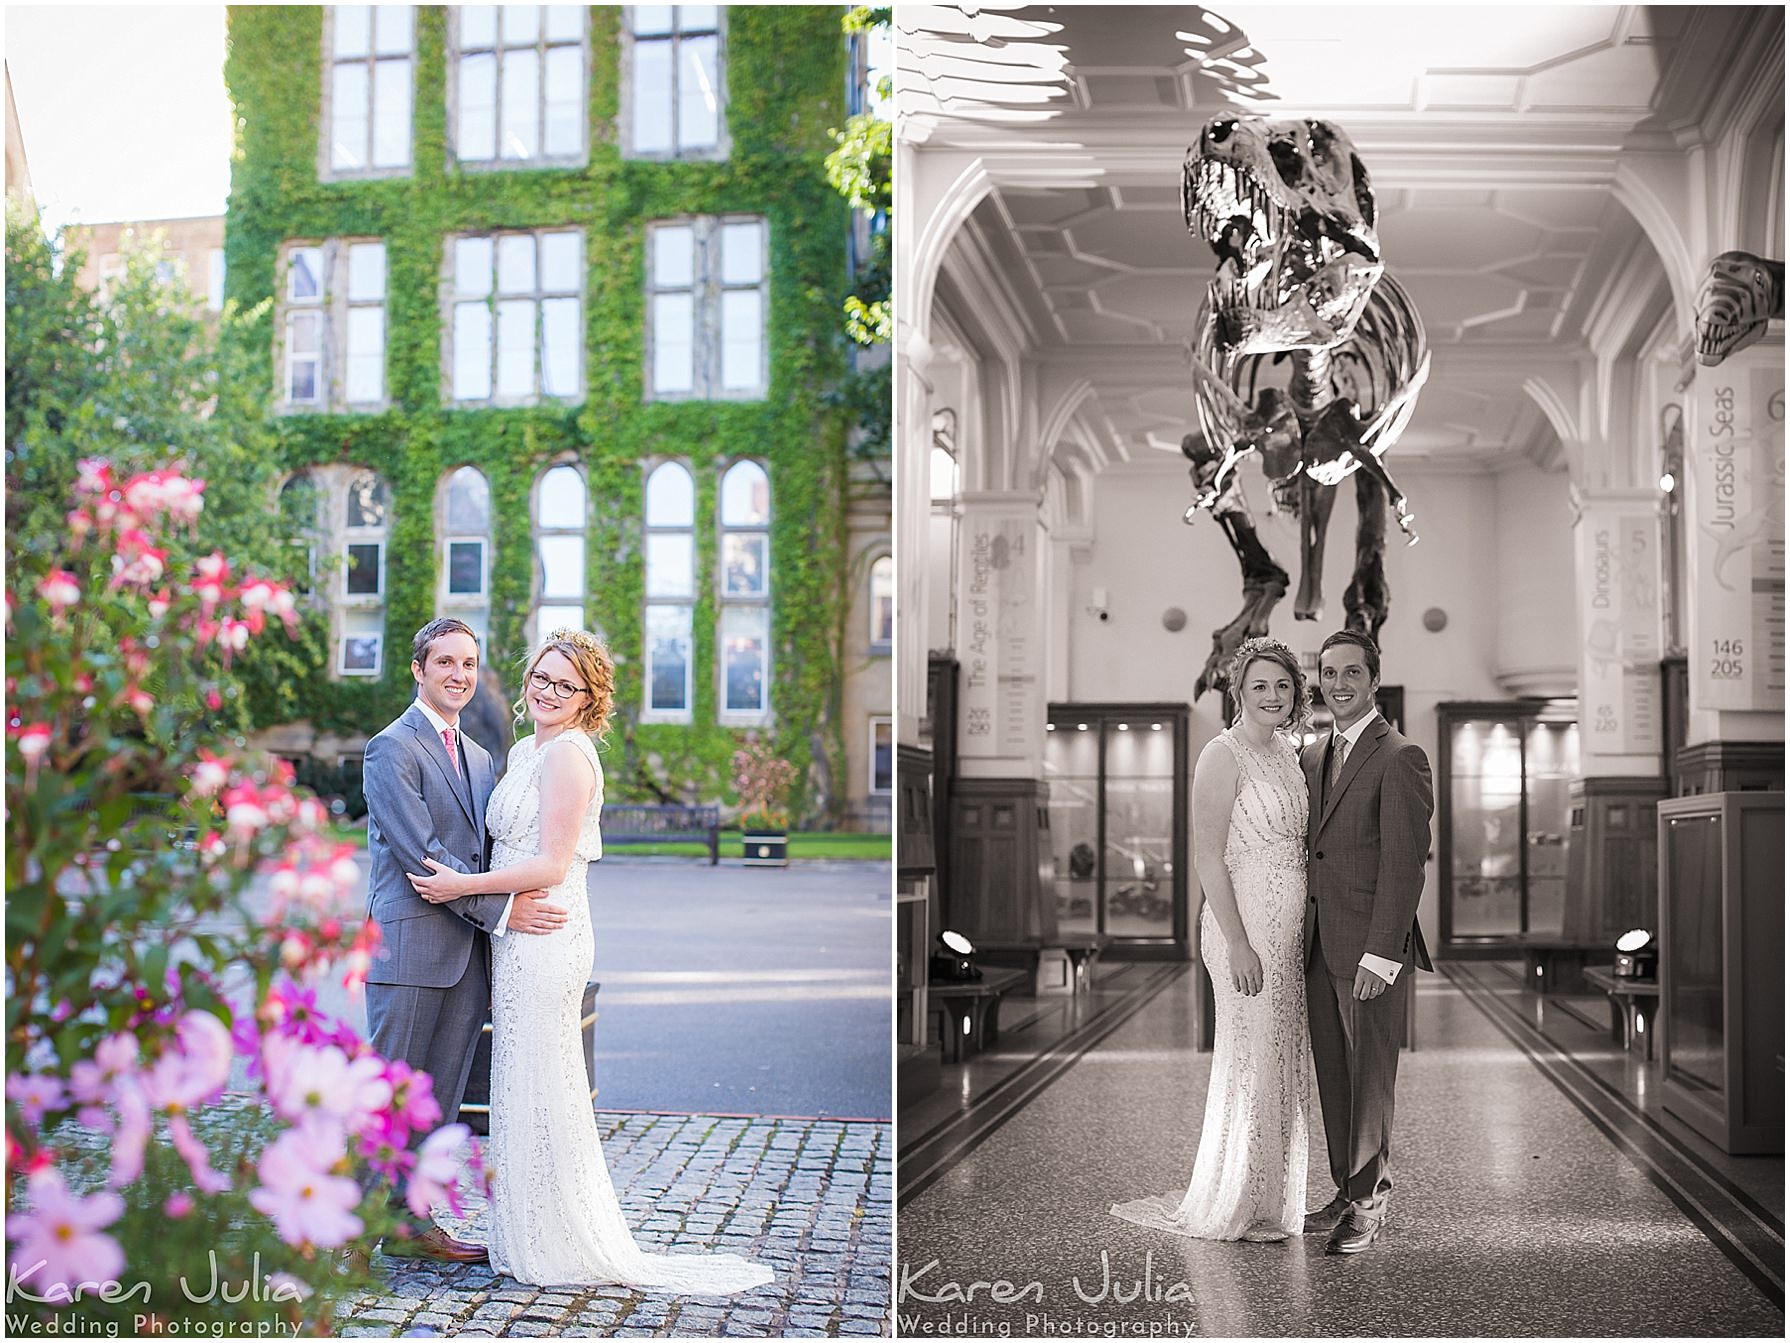 Manchester Museum Wedding Photography in the courtyard and fossil room